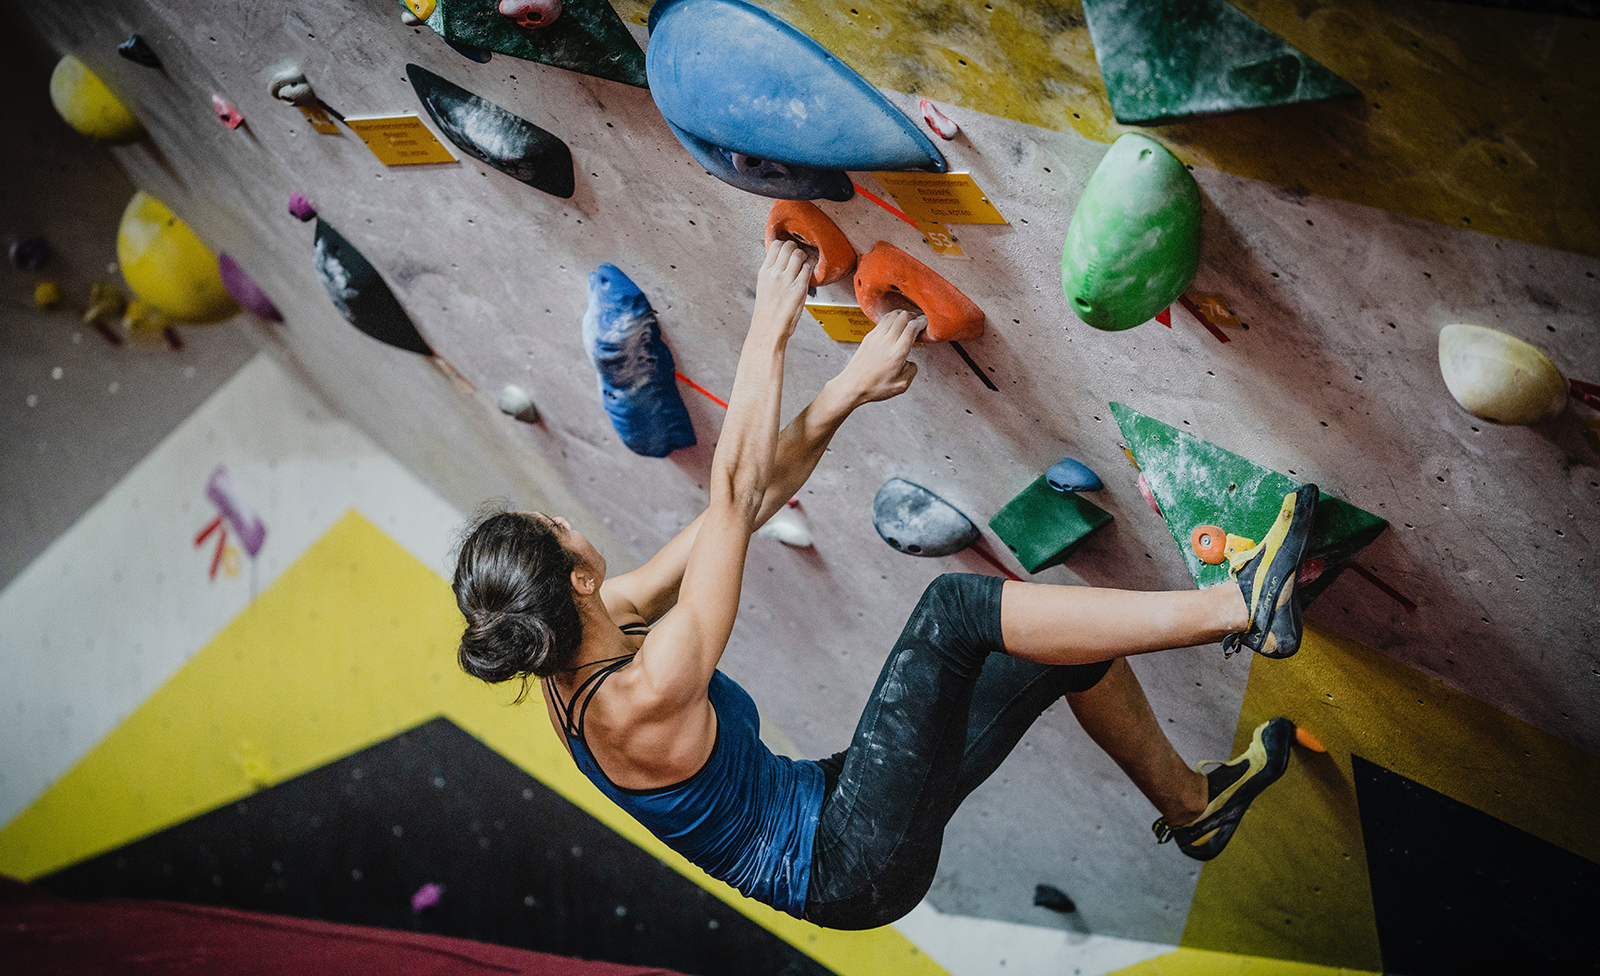 rock climbing is an adventure sport that can keep you fit.
